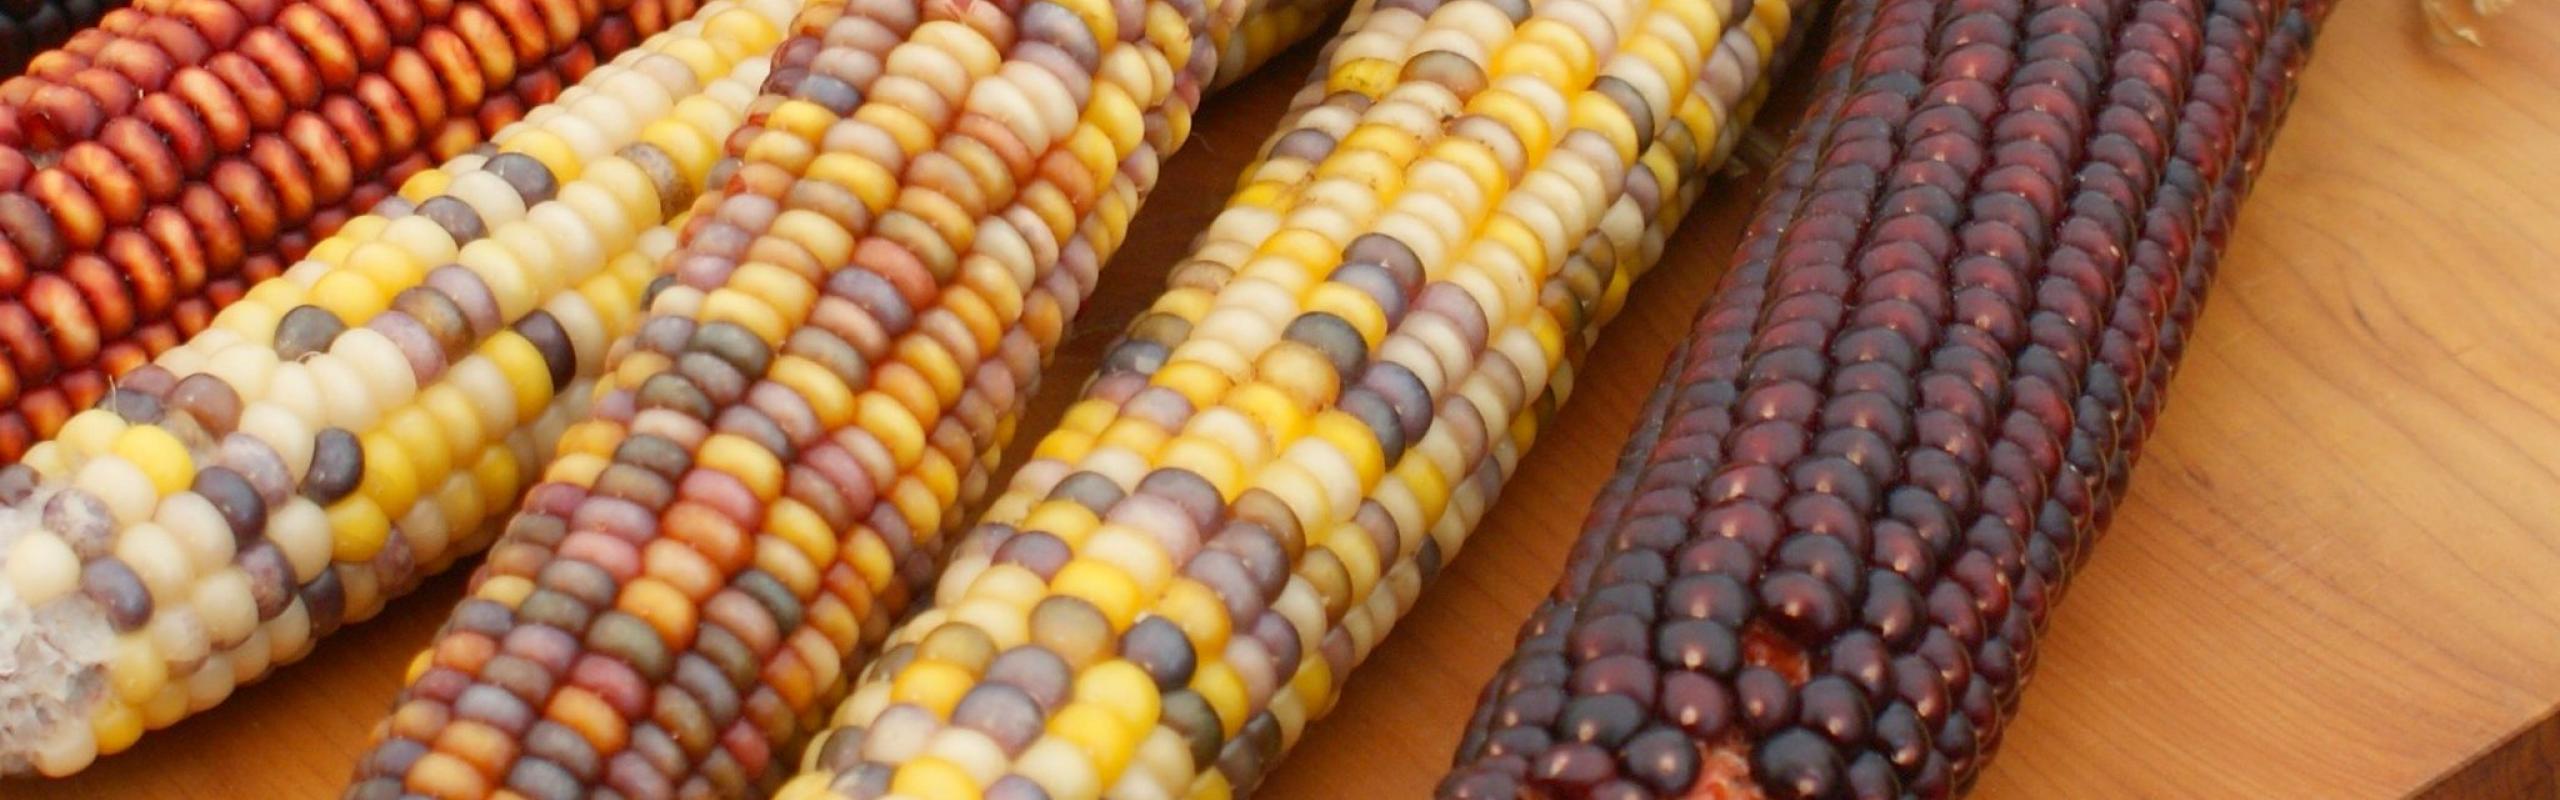 Ears of colorful maize piled on a wood table